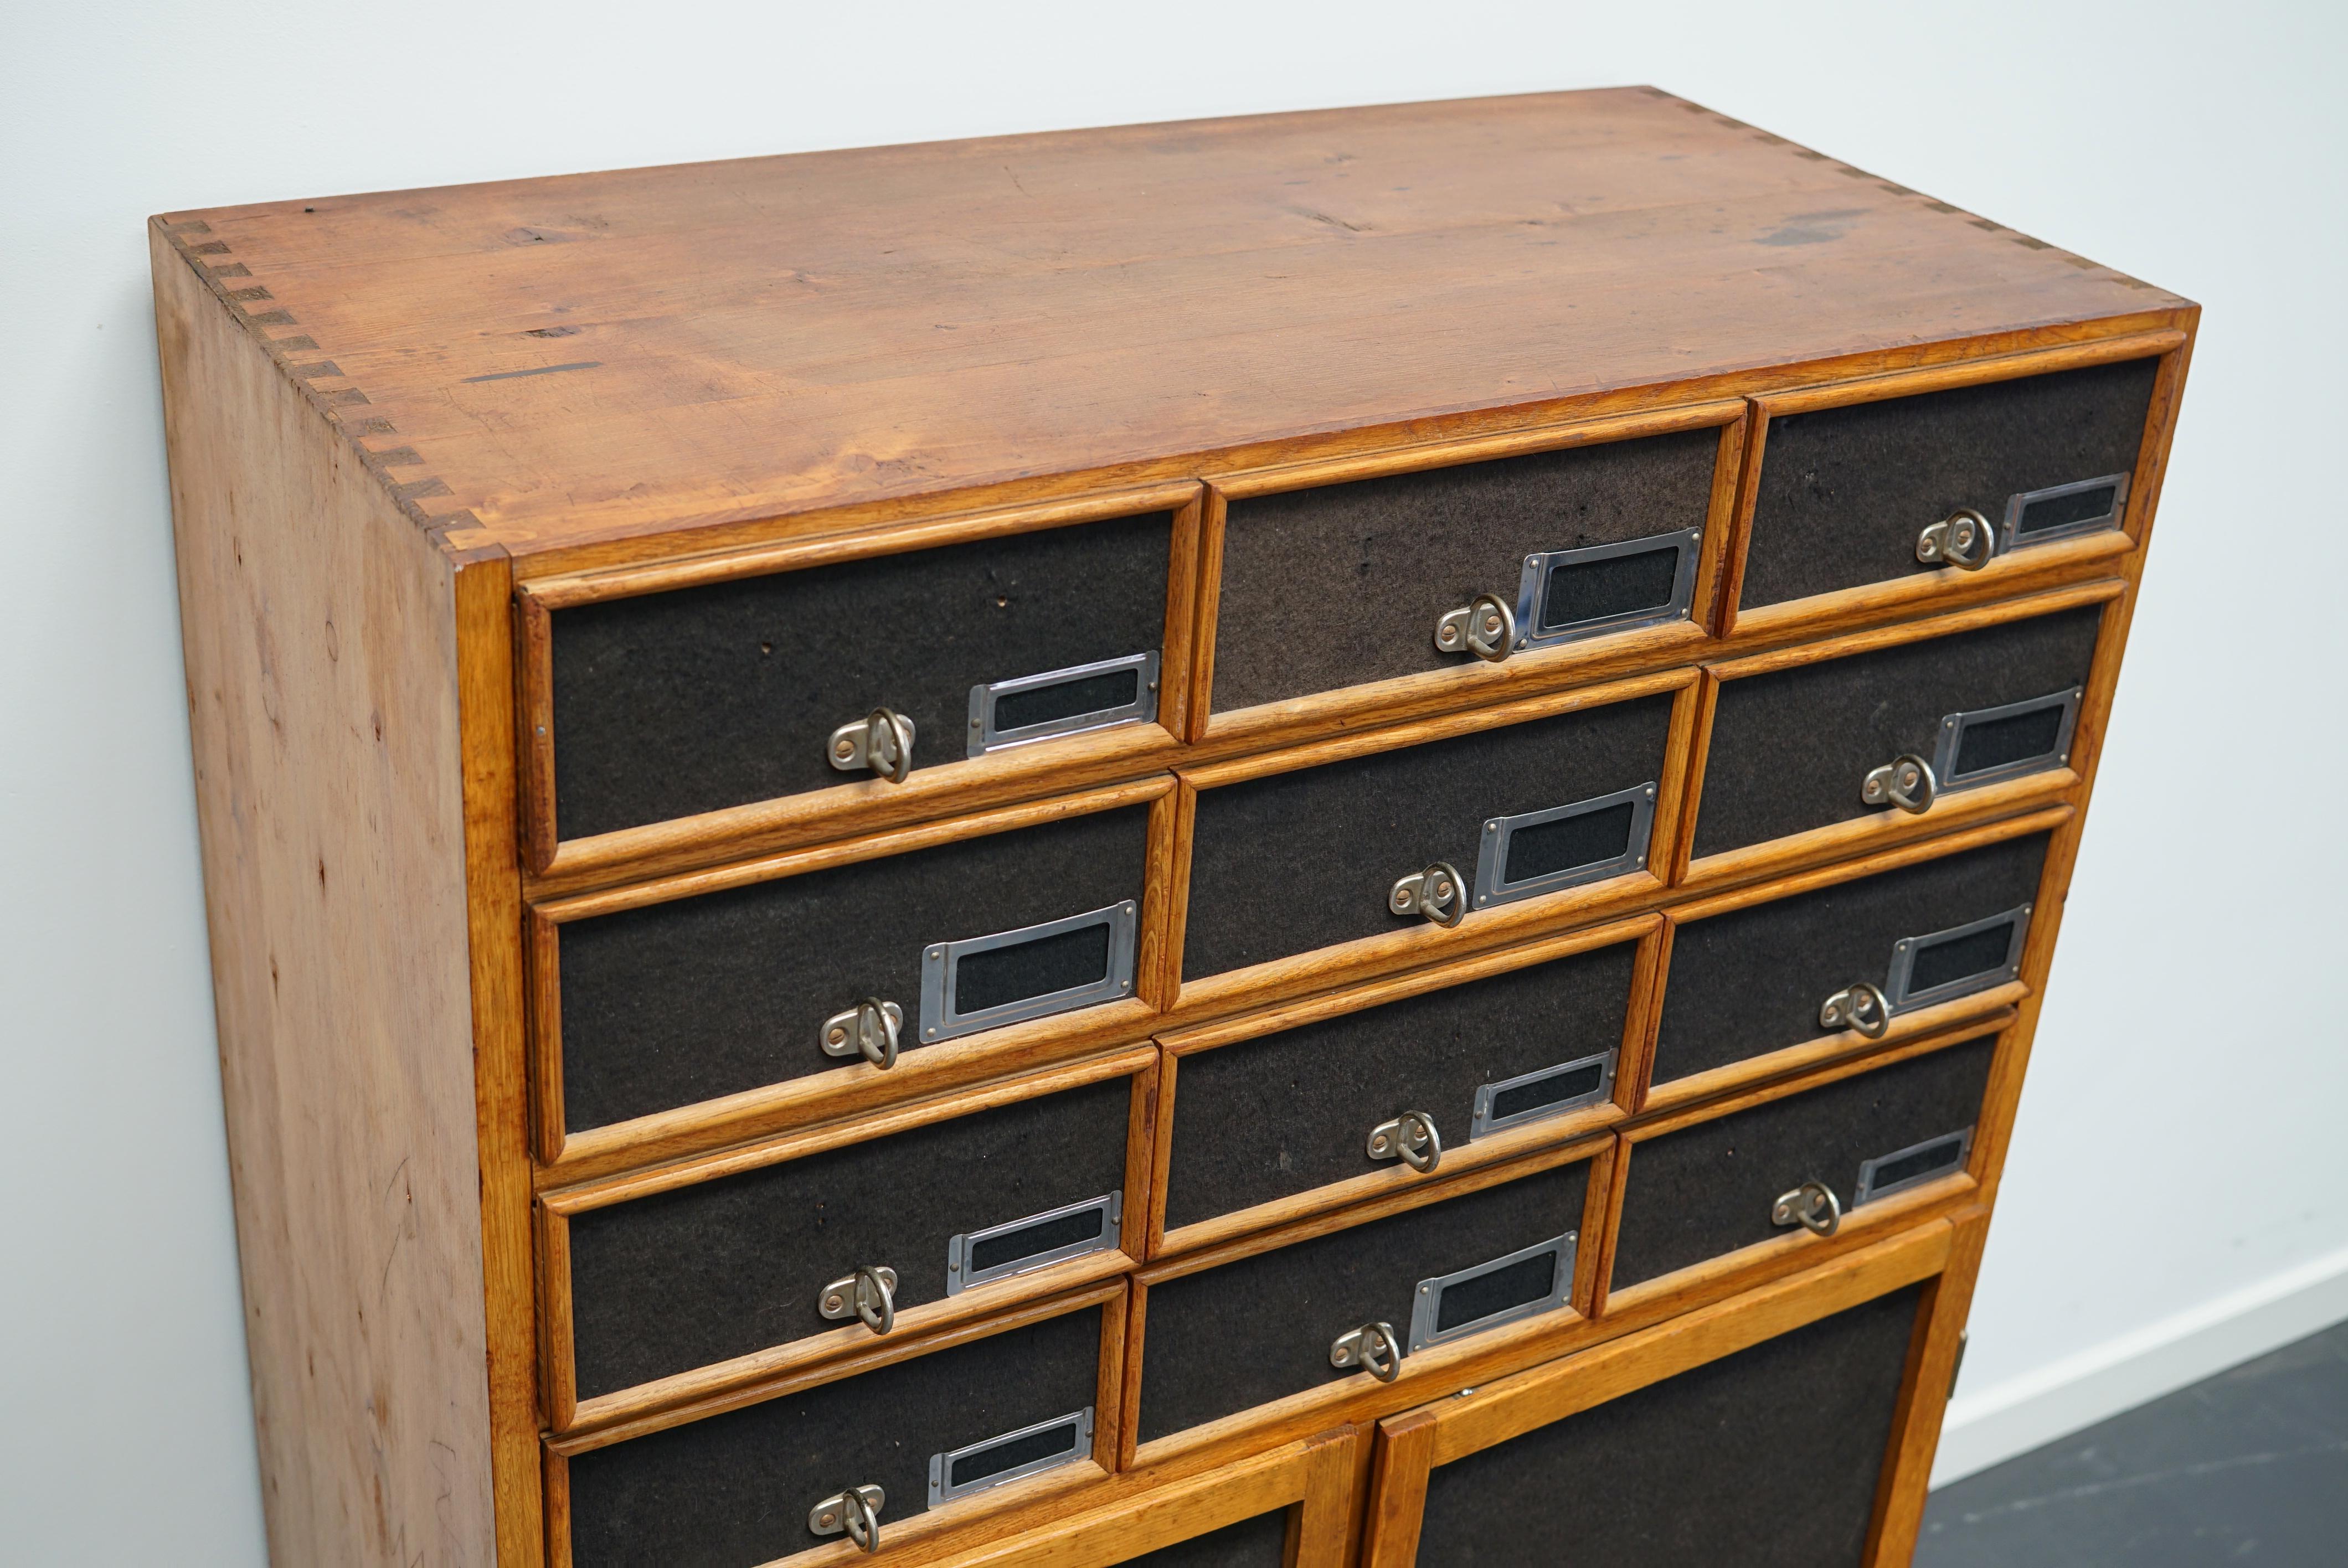 German Industrial Oak and Pine Apothecary Cabinet, Mid-20th Century For Sale 1